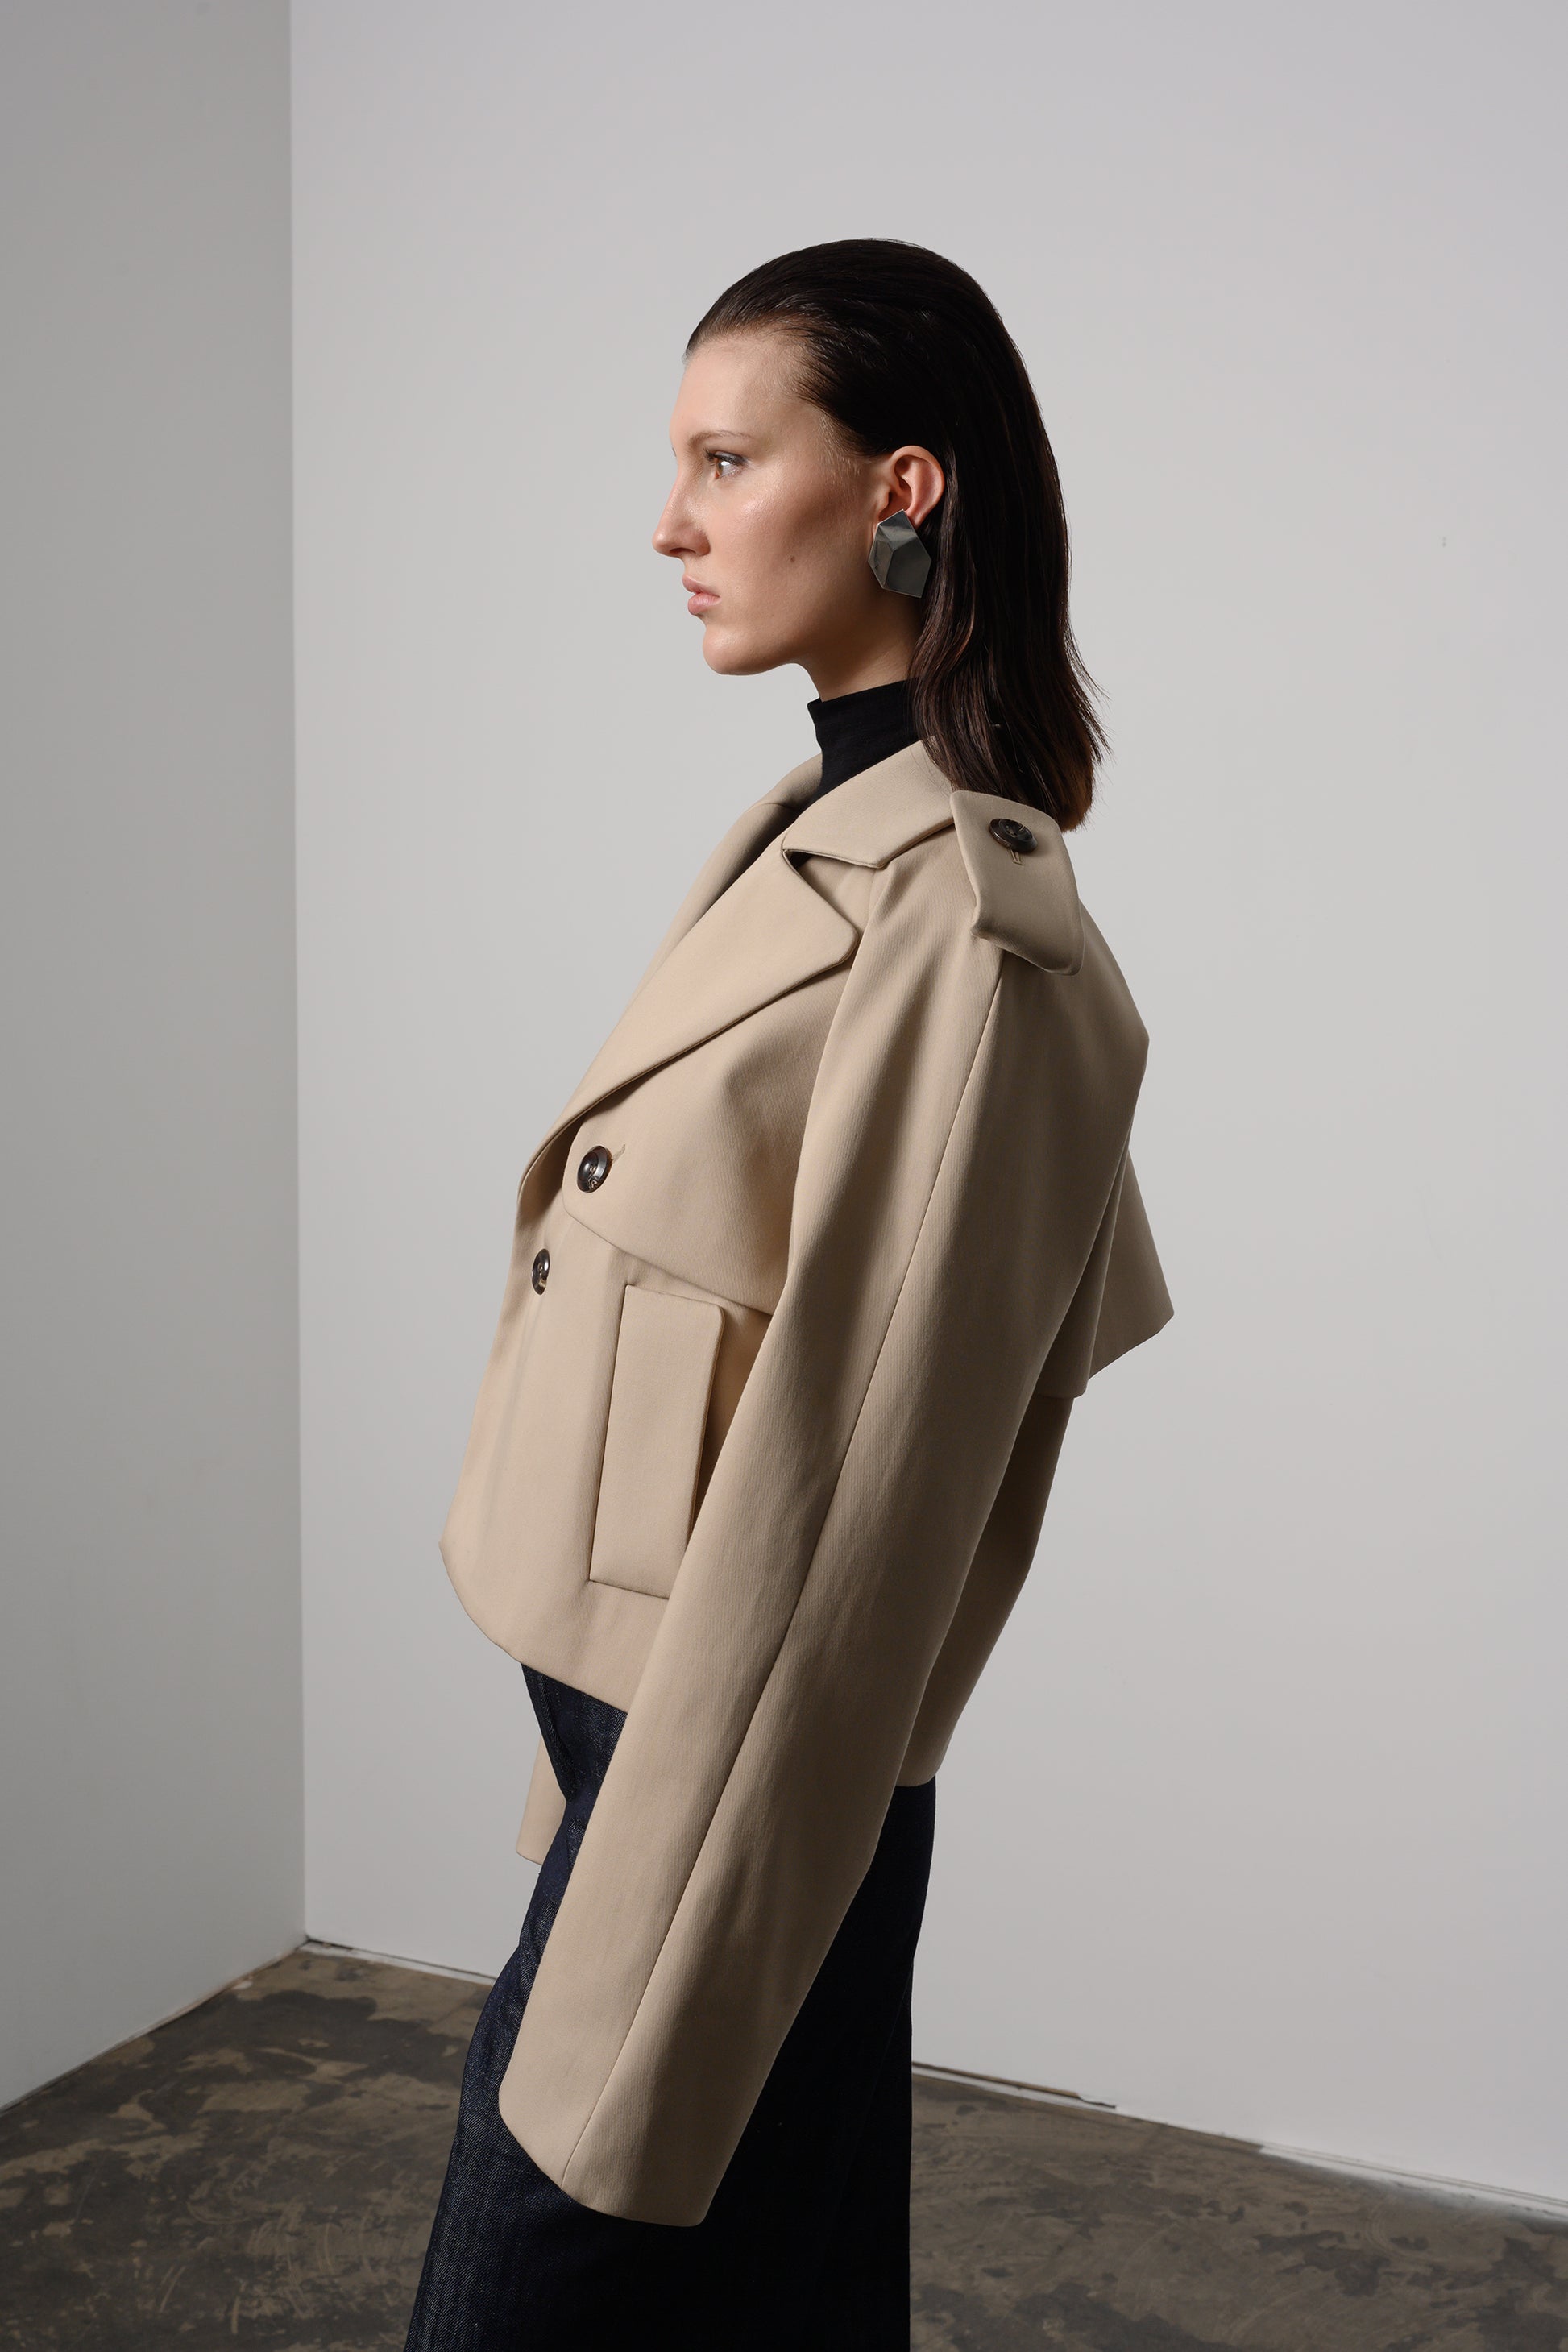 Chic  cropped trench jacket with modern epaulette details, a double-breasted front, and long sleeves, blending classic design with a contemporary cropped cut